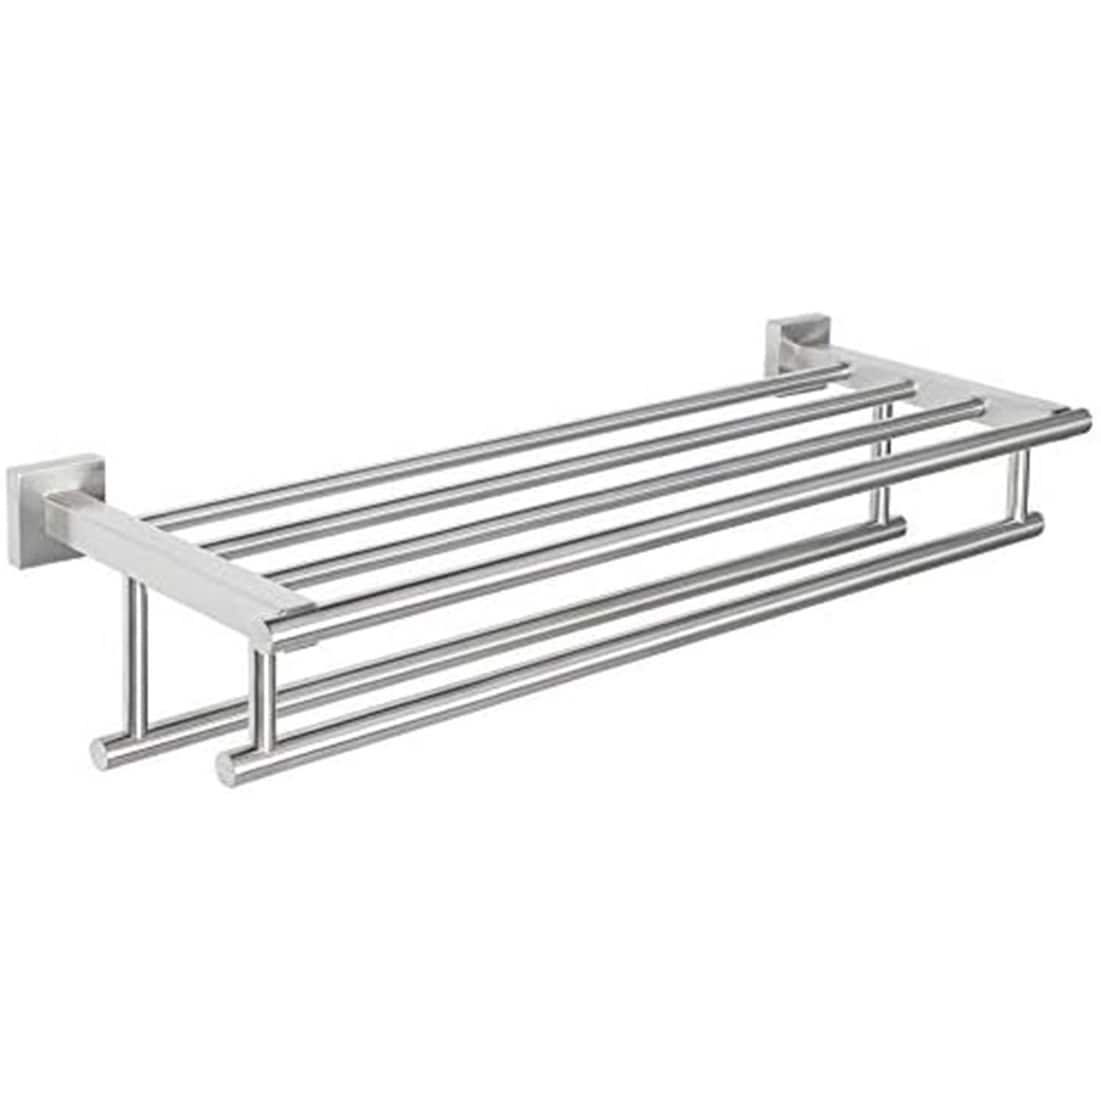 https://ak1.ostkcdn.com/images/products/is/images/direct/cc9f869b63be8a8ee9fc35f47d673f4dd6719464/Towel-Rack%2Cwith-Double-Towel-Bars%2C20-Inch.jpg